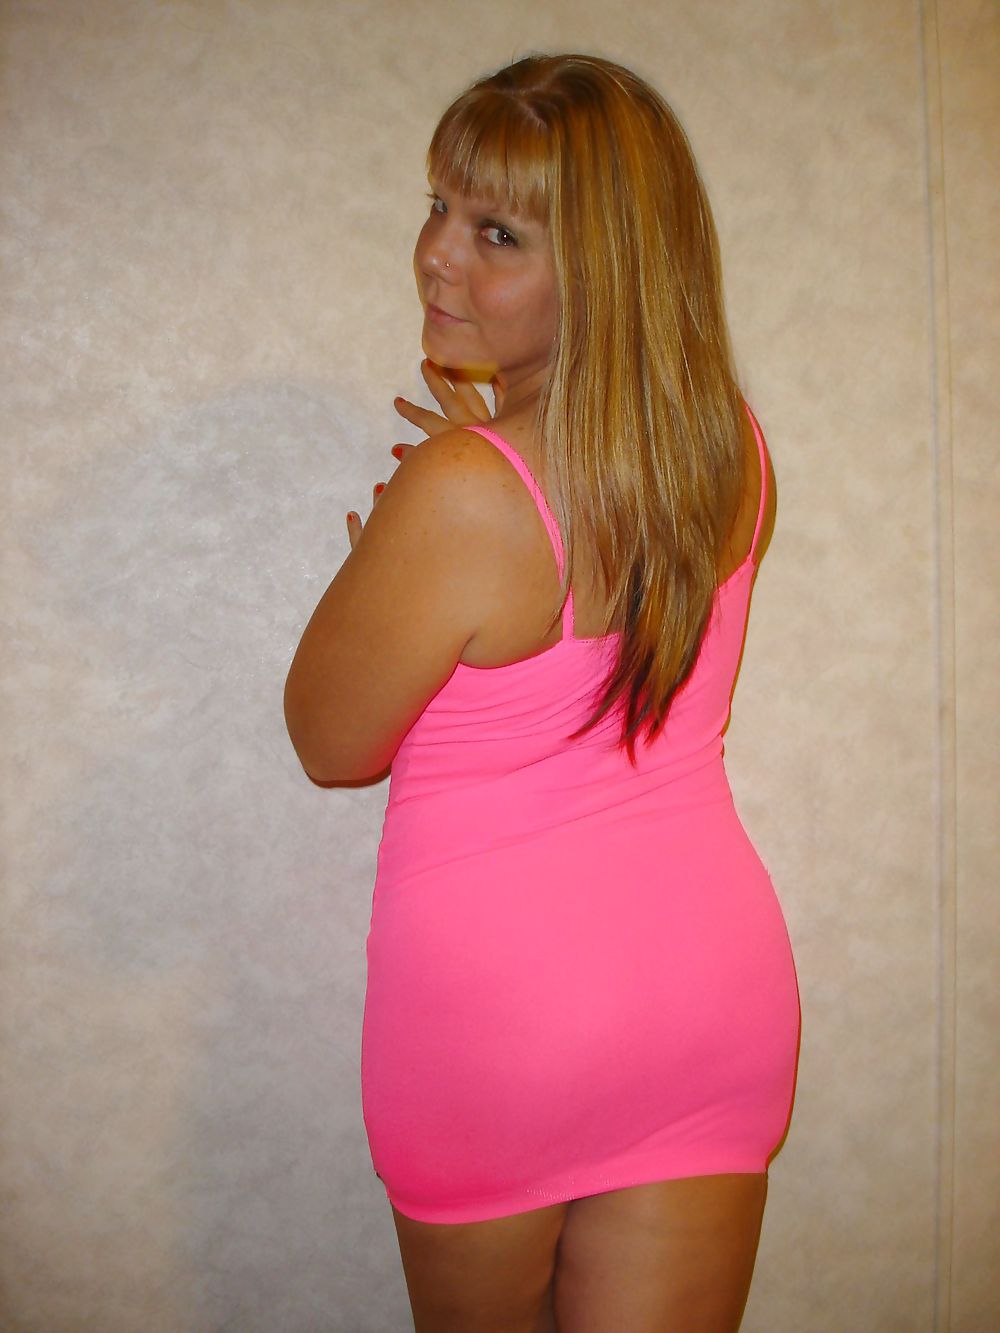 Porn Pics wife is sexy in pink